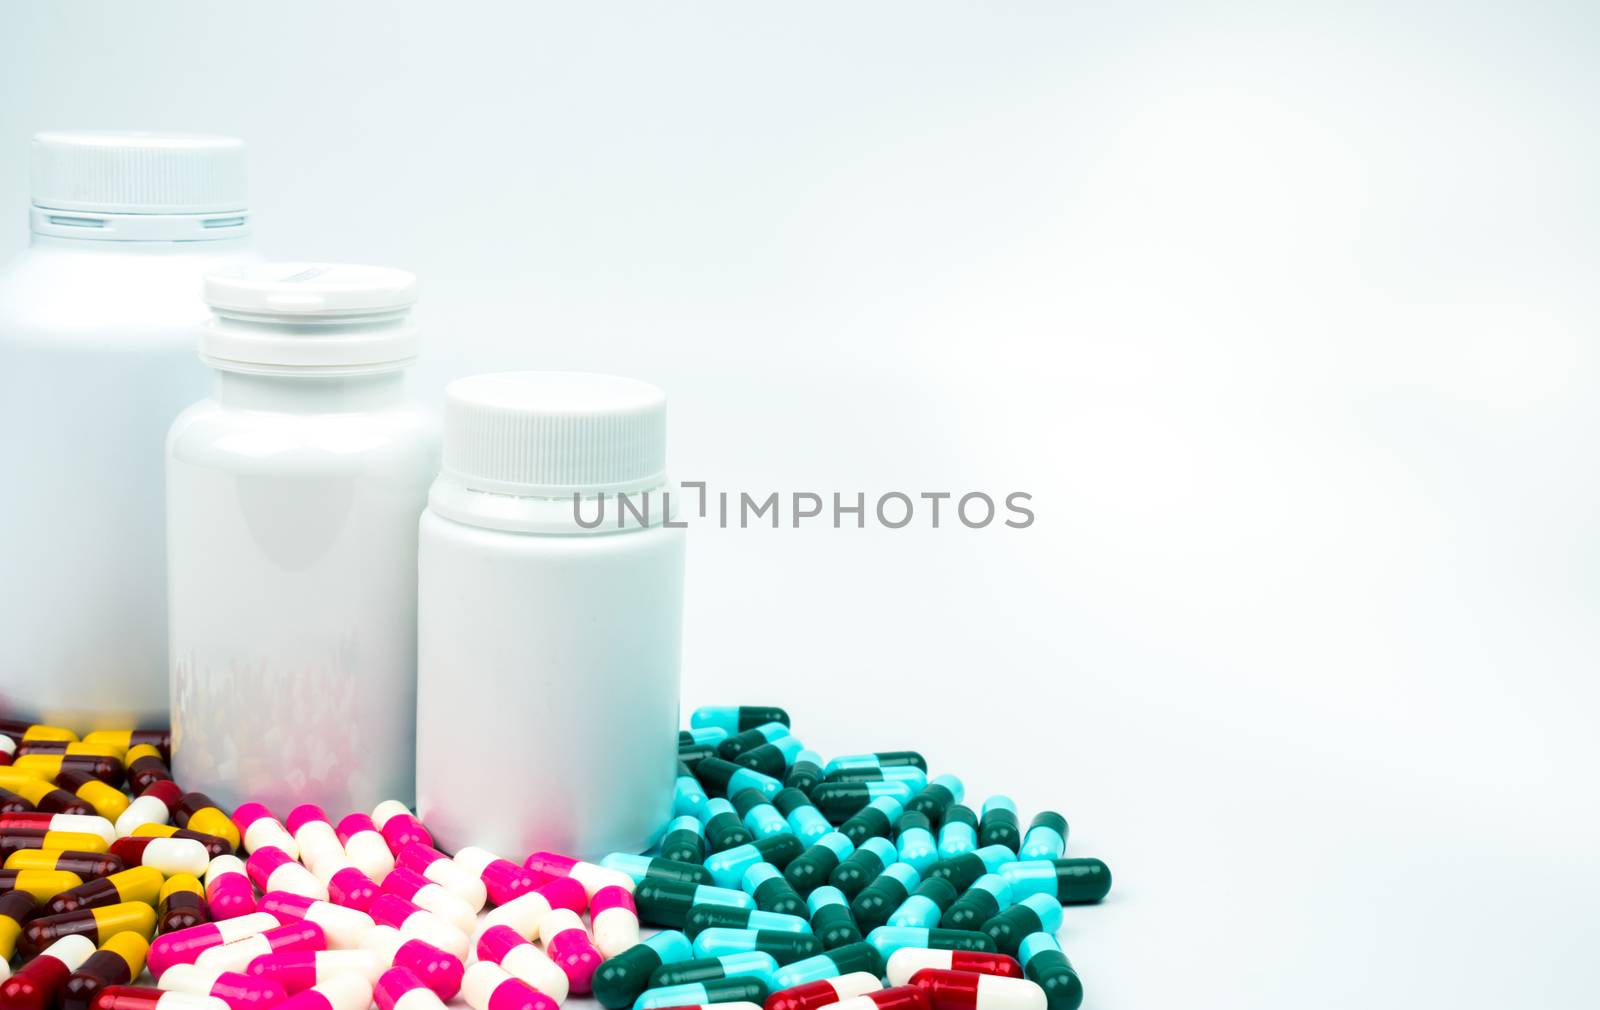 Antibiotic capsules pills and plastic bottle with blank label isolated on white background with copy space. Drug resistance concept. Antibiotics drug use with reasonable and global healthcare concept. Pharmaceutical industry. Health budgets and policy. by Fahroni